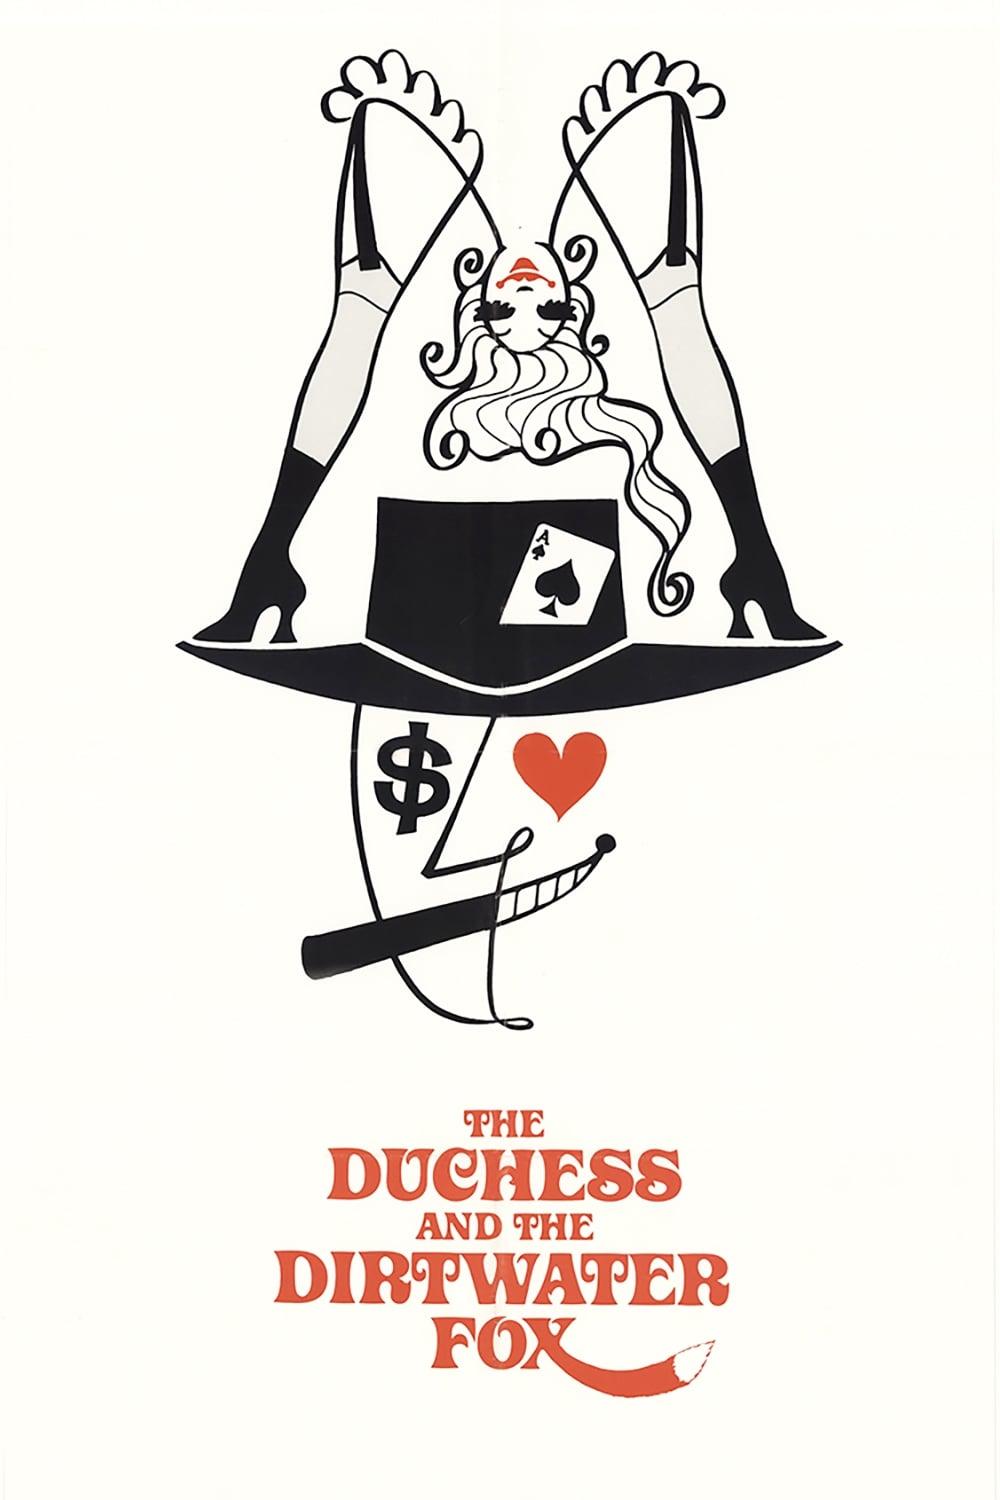 The Duchess and the Dirtwater Fox poster